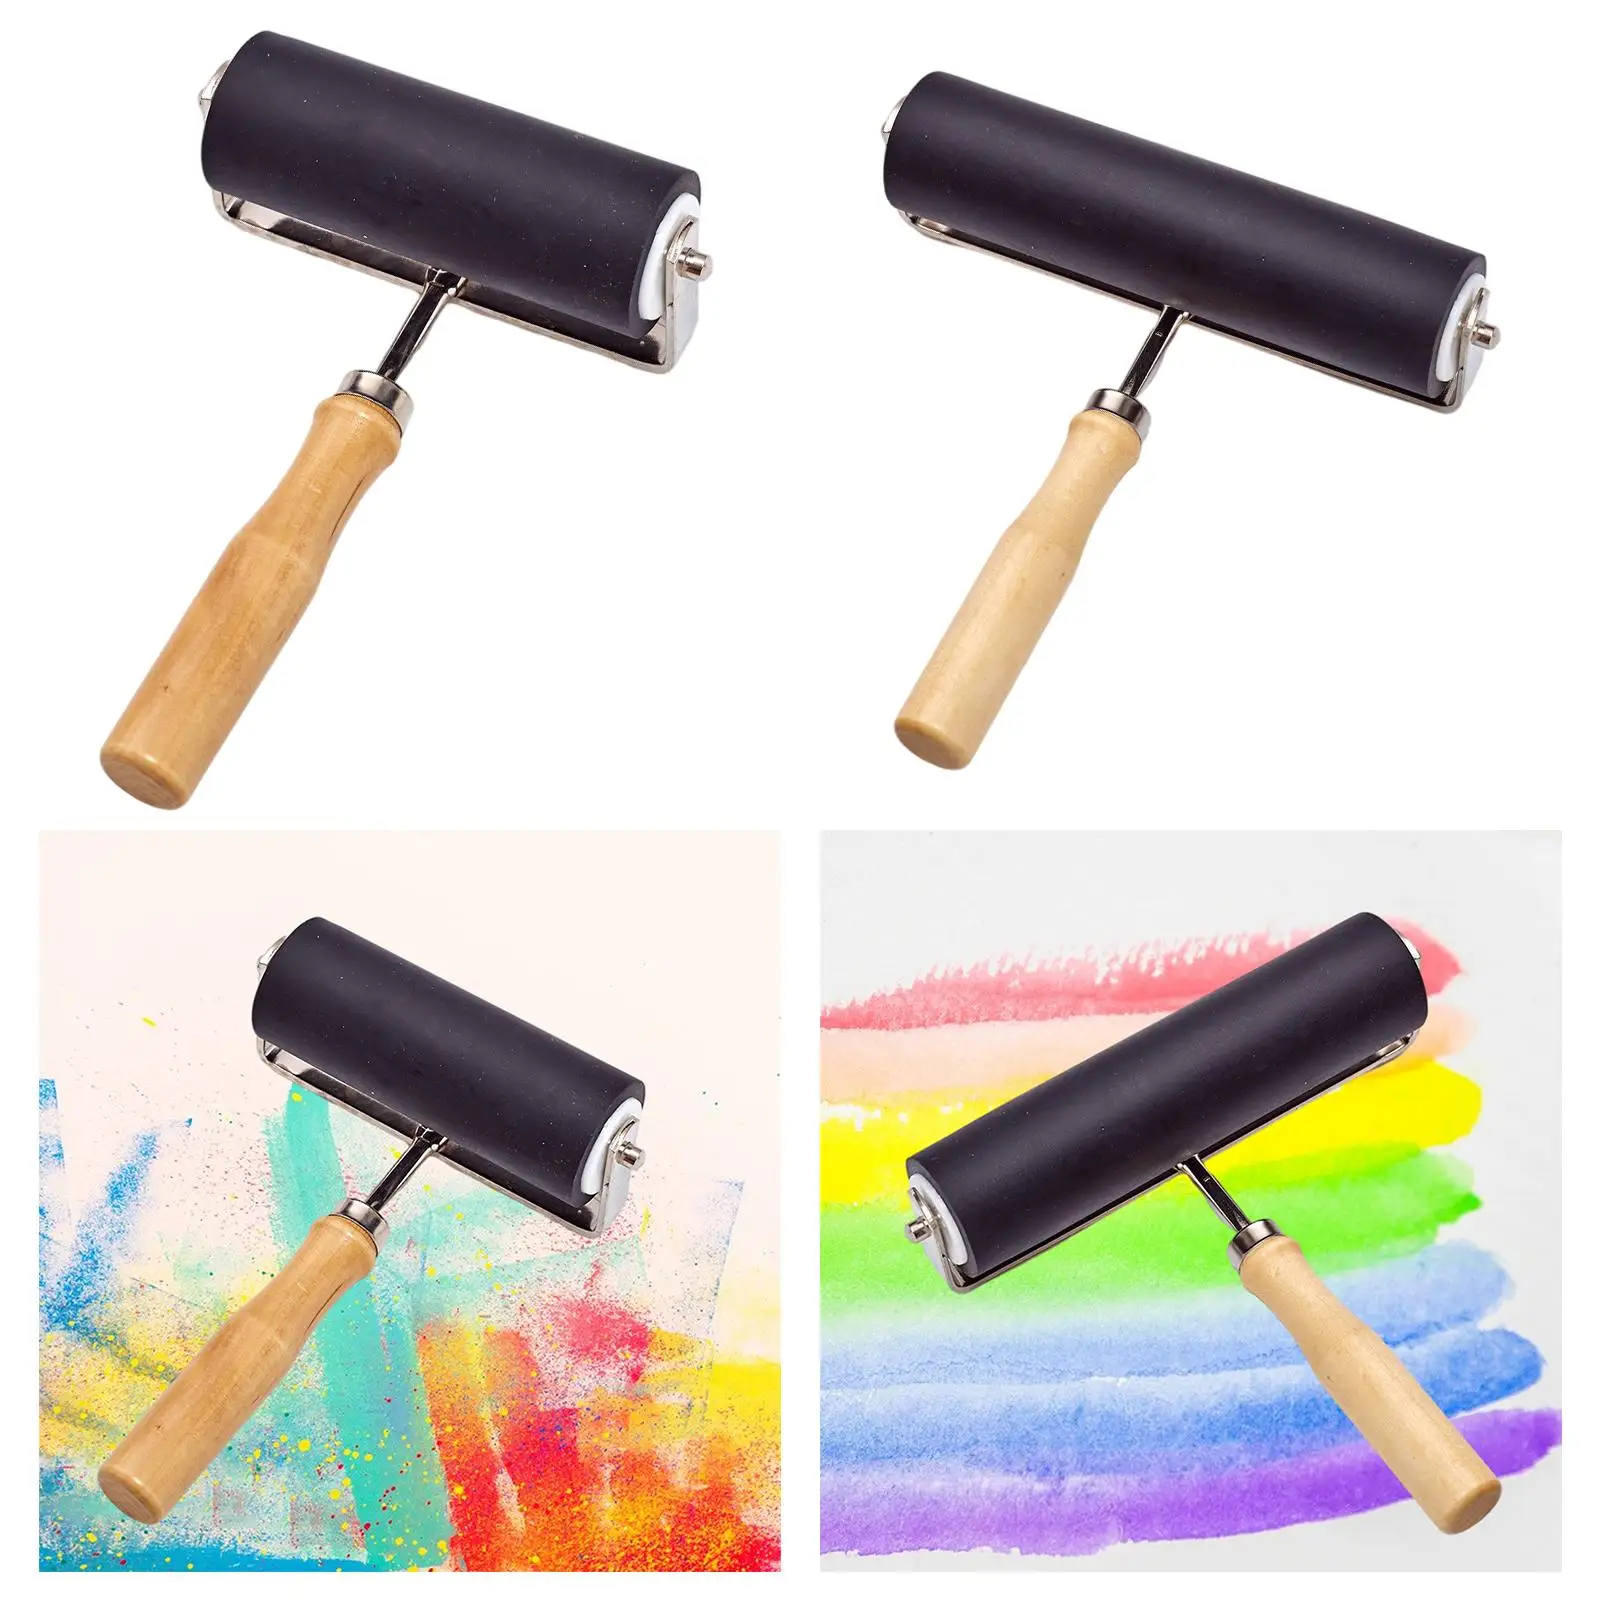 Black Rubber Roller  Tool Construction  Handle Tool Anti Skid for Printmaking Block Printing Oil Painting Mats Stamping